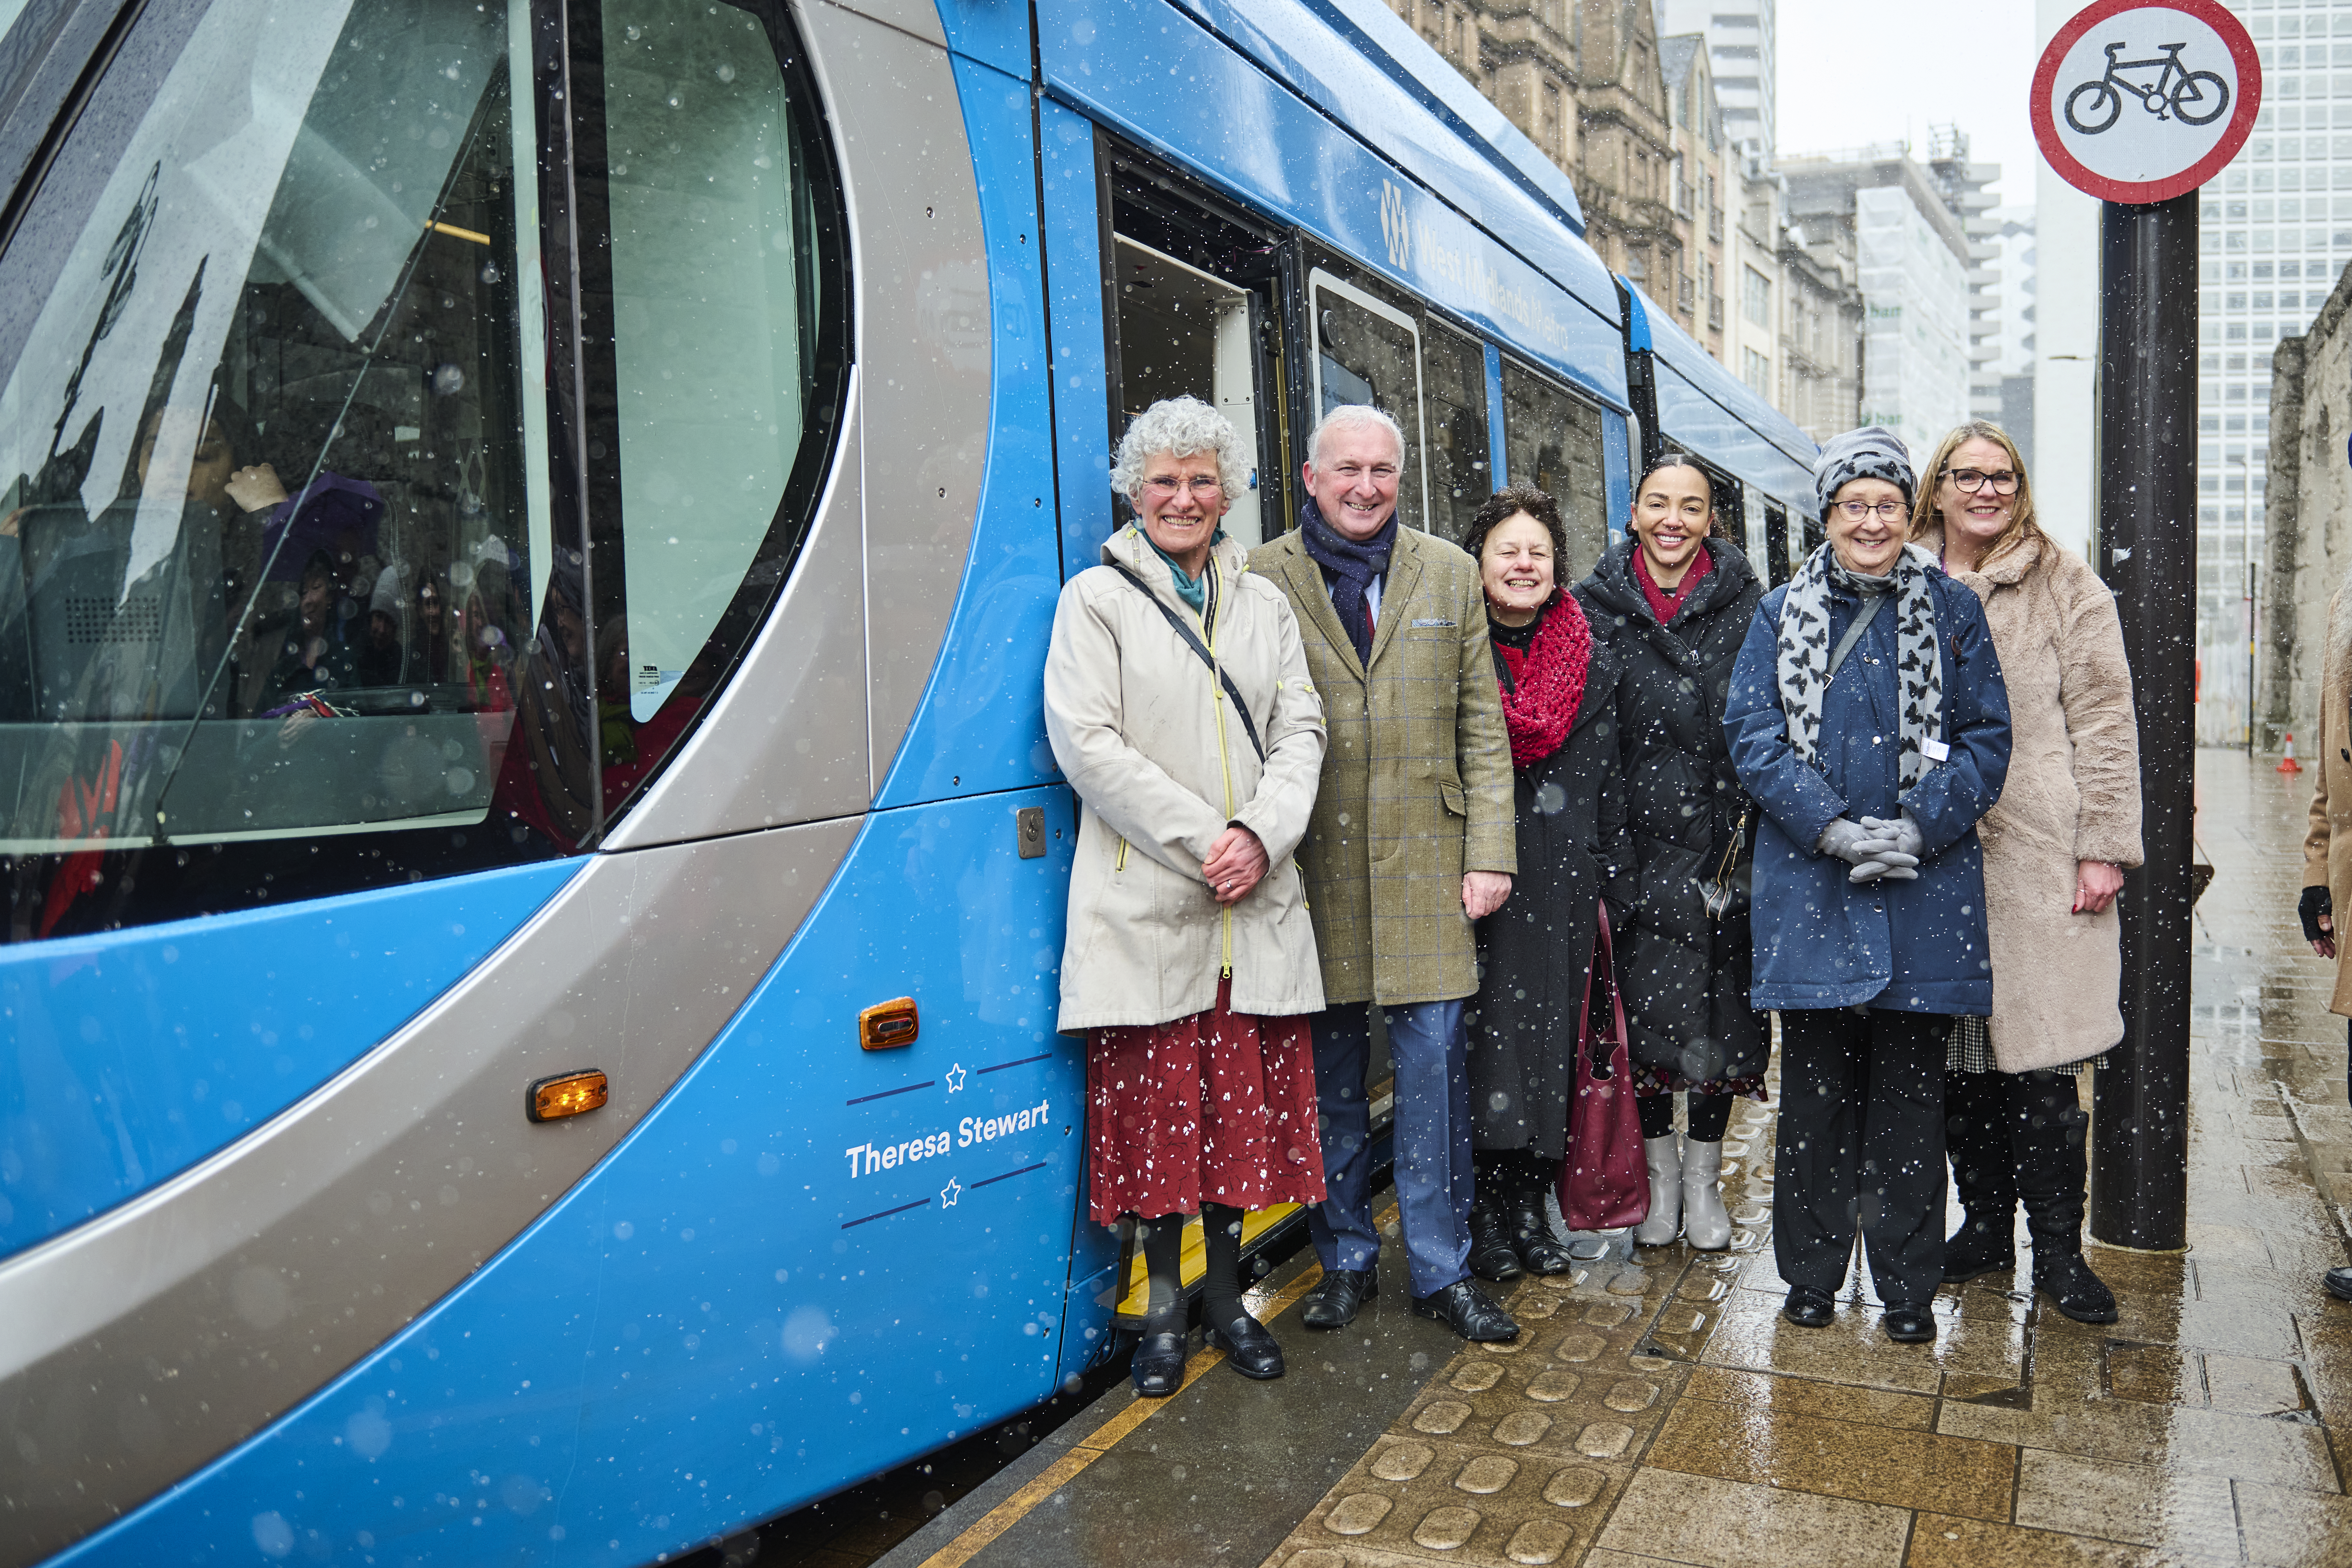 From left: Sabrina Stewart, Cllr Ian Ward (Birmingham City Council) , Lindsey Stewart, Sophie Allison (West Midlands Metro), Cllr Mary Locke (vice-chair WMCA Transport Delivery Committee) and Anne Shaw (Transport for West Midlands)